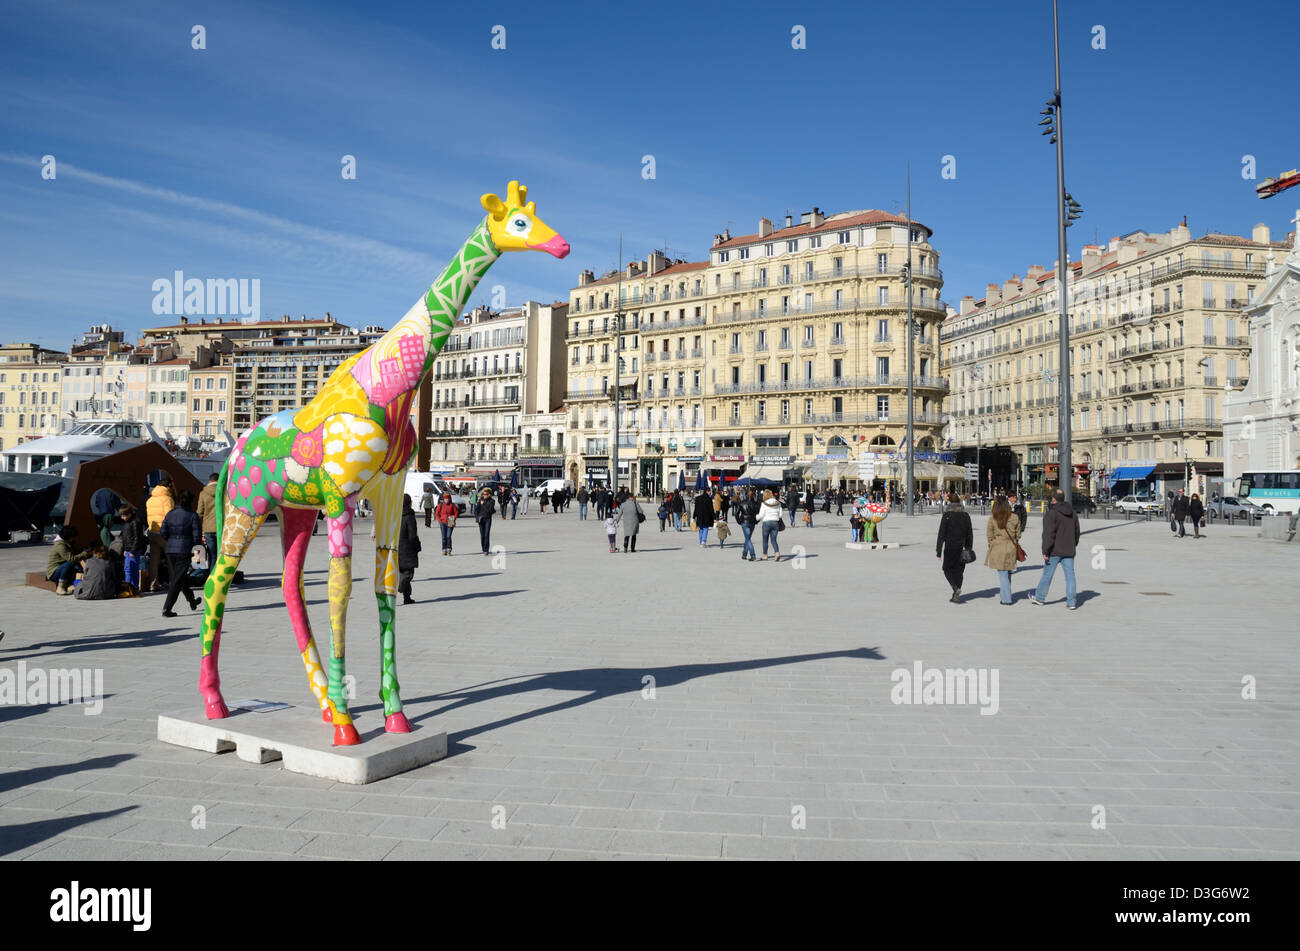 Public Town Square & Giraffe Sculpture on the Quay,or Quayside Quai des Belges Vieux Port or Old Port Marseille Provence France Stock Photo